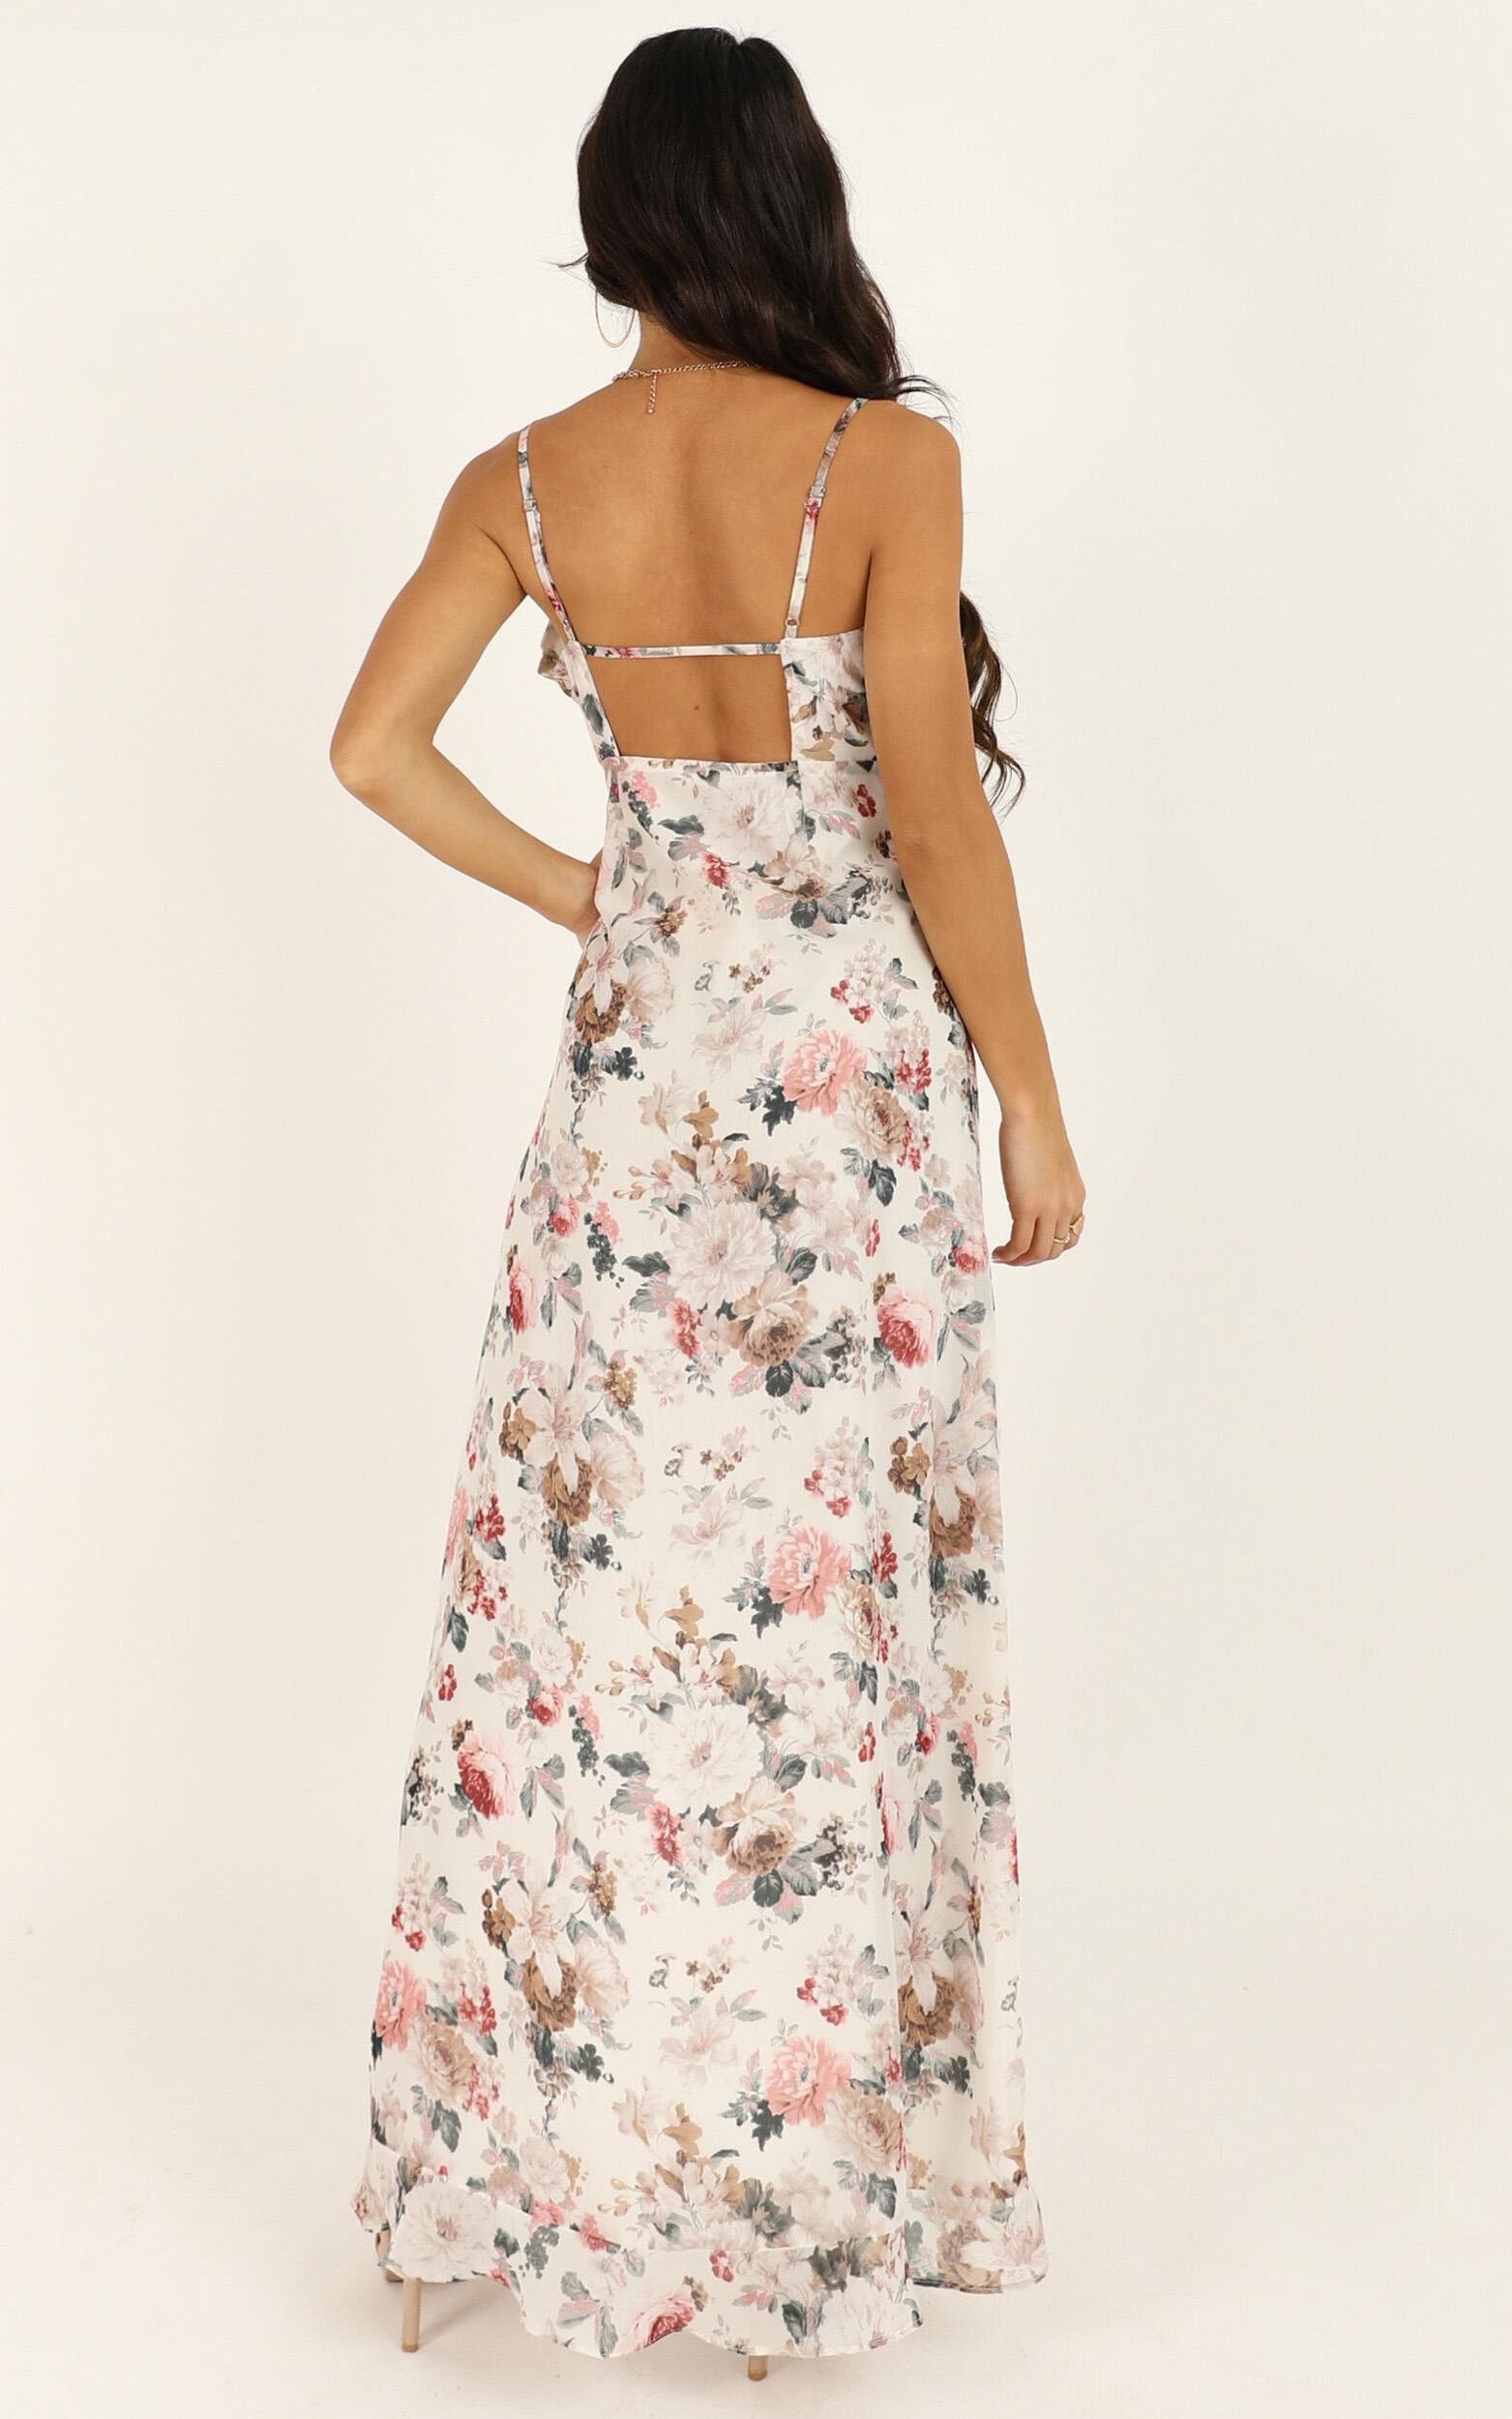 So Clumsy I Am Falling In Love Dress In White Floral | Showpo